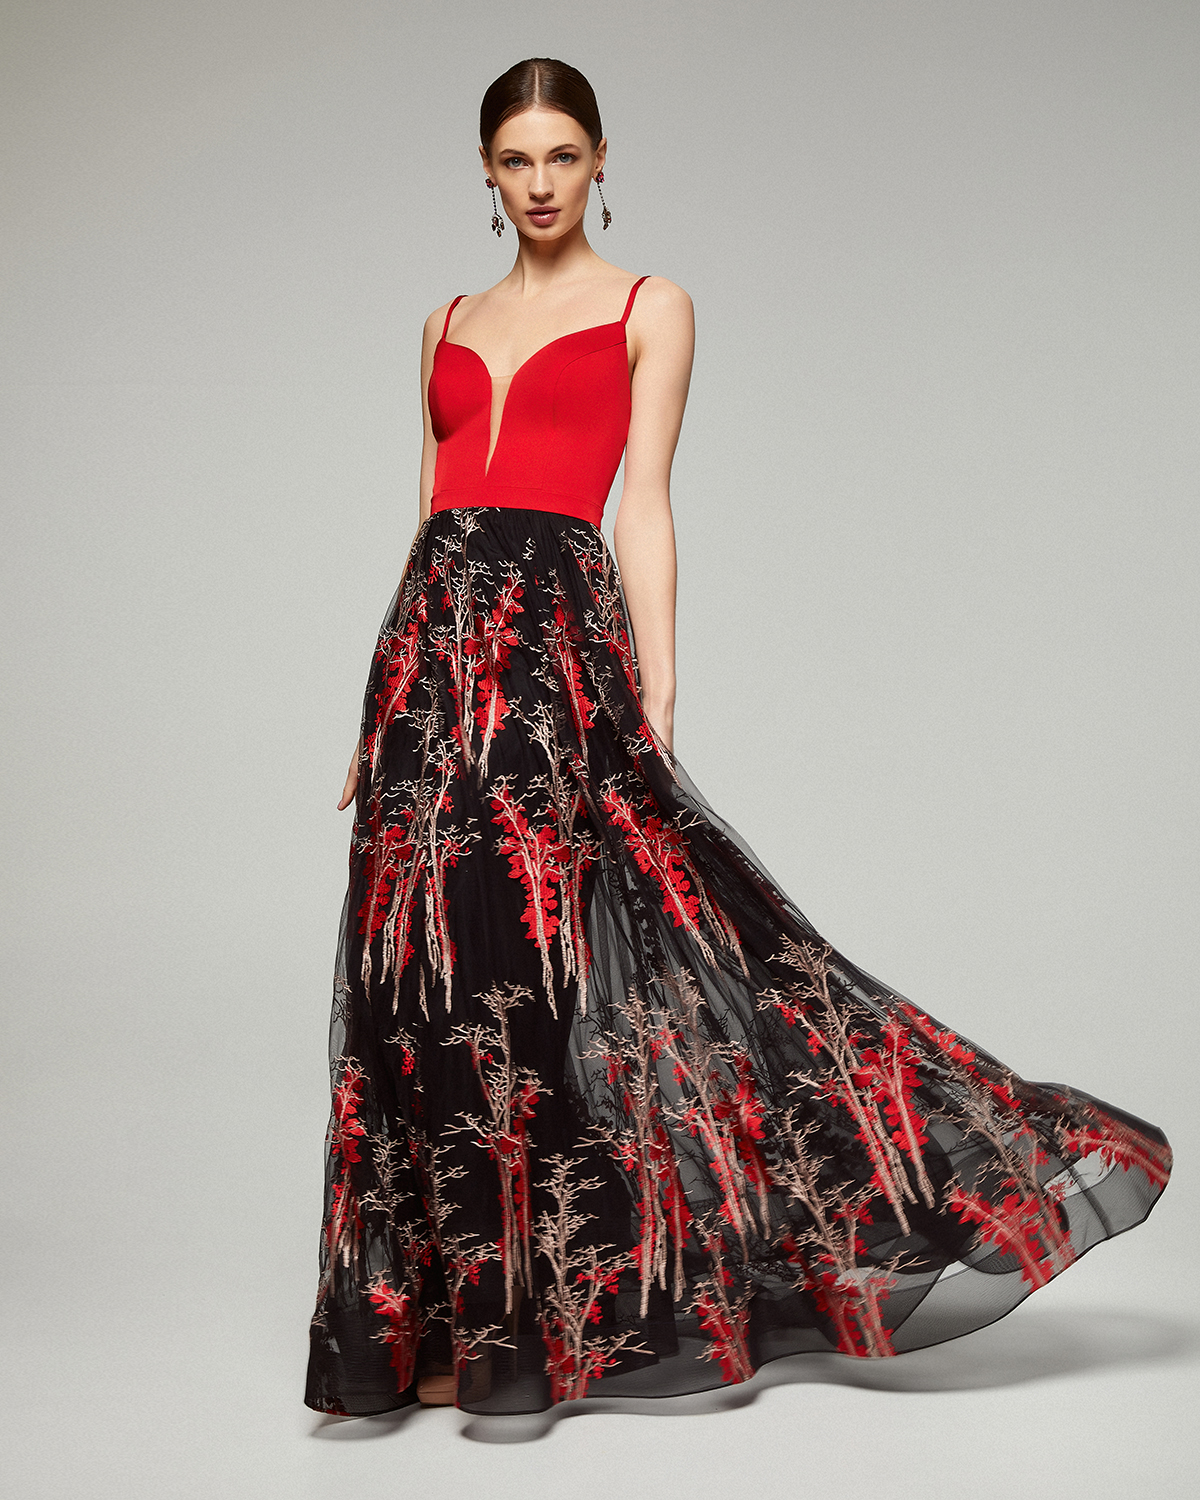 Long evening dress with printed skirt and solid top